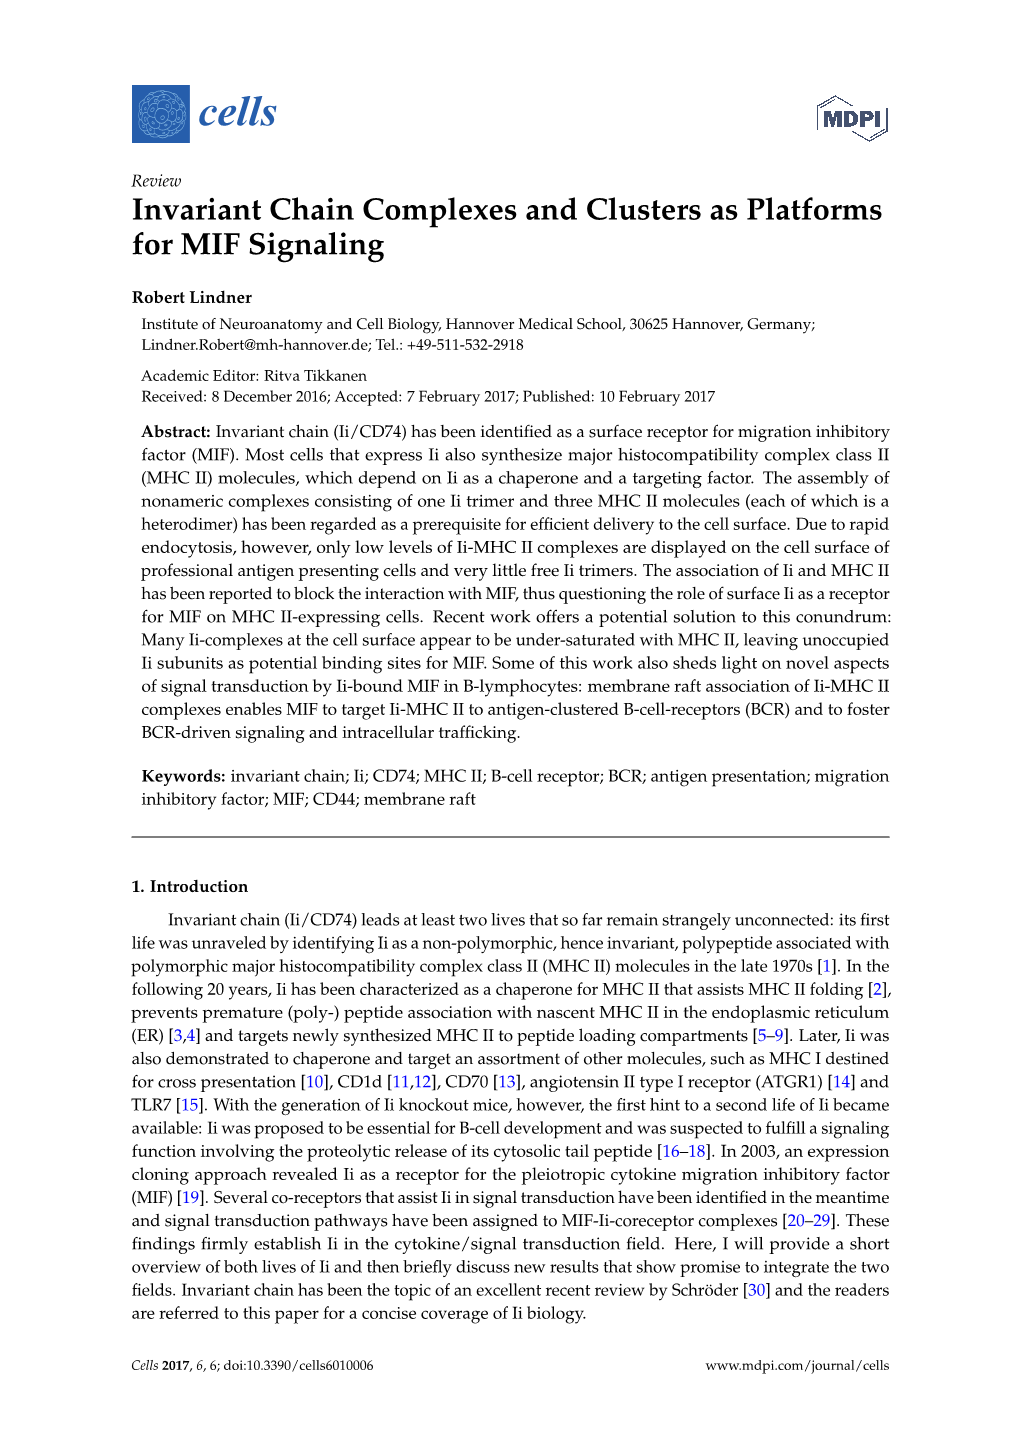 Invariant Chain Complexes and Clusters As Platforms for MIF Signaling